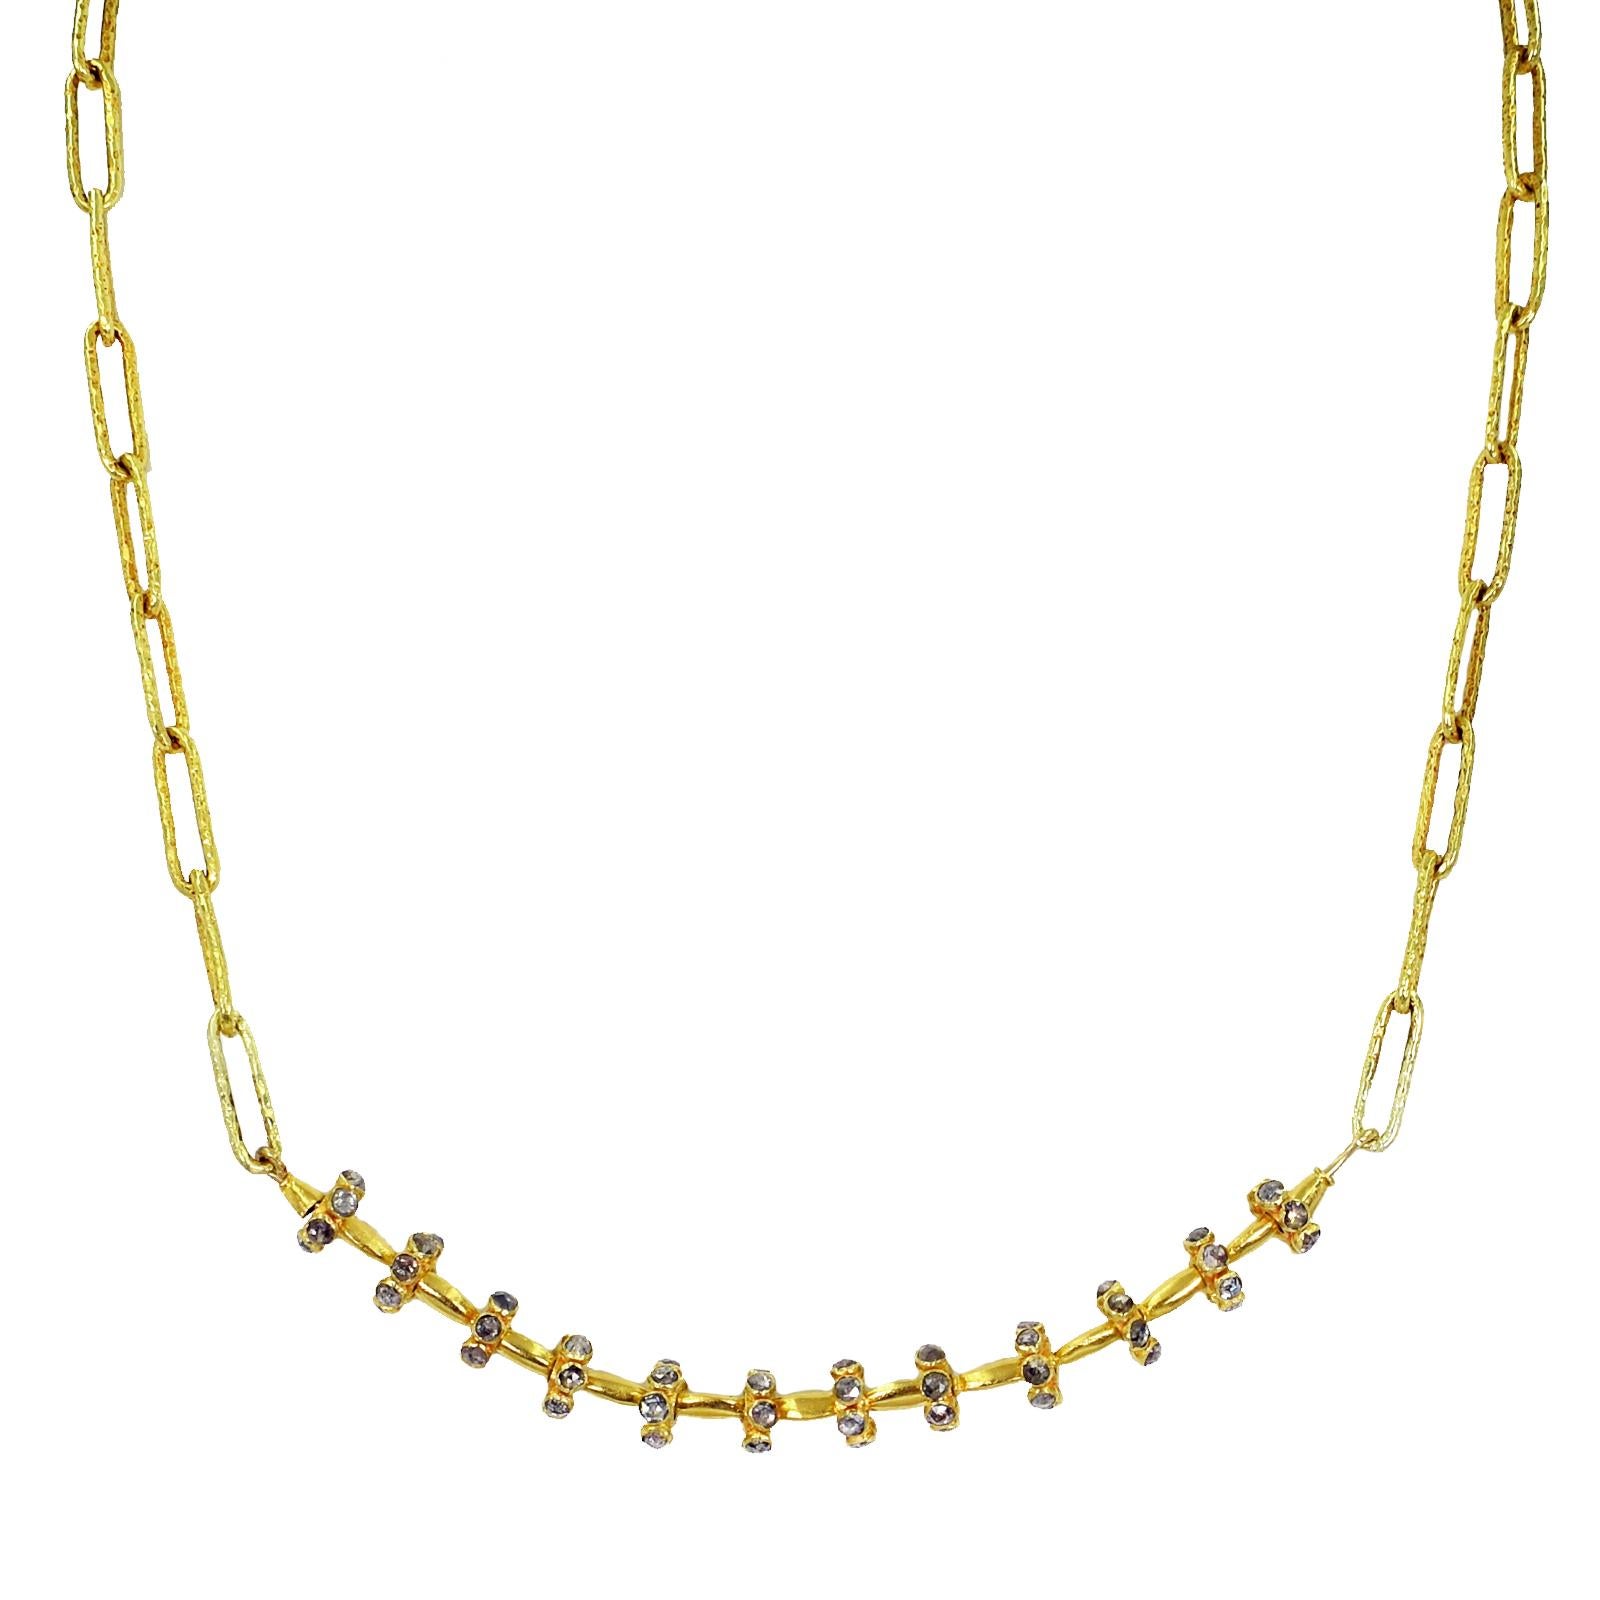 Handmade 22k yellow gold “paper clip” chain necklace featuring Diamond rondelle beads. Necklace is 16.5 inches in length, and finished with hammered hook closure. Rich, high-karat gold in this artisan, contemporary beaded chain necklace. 